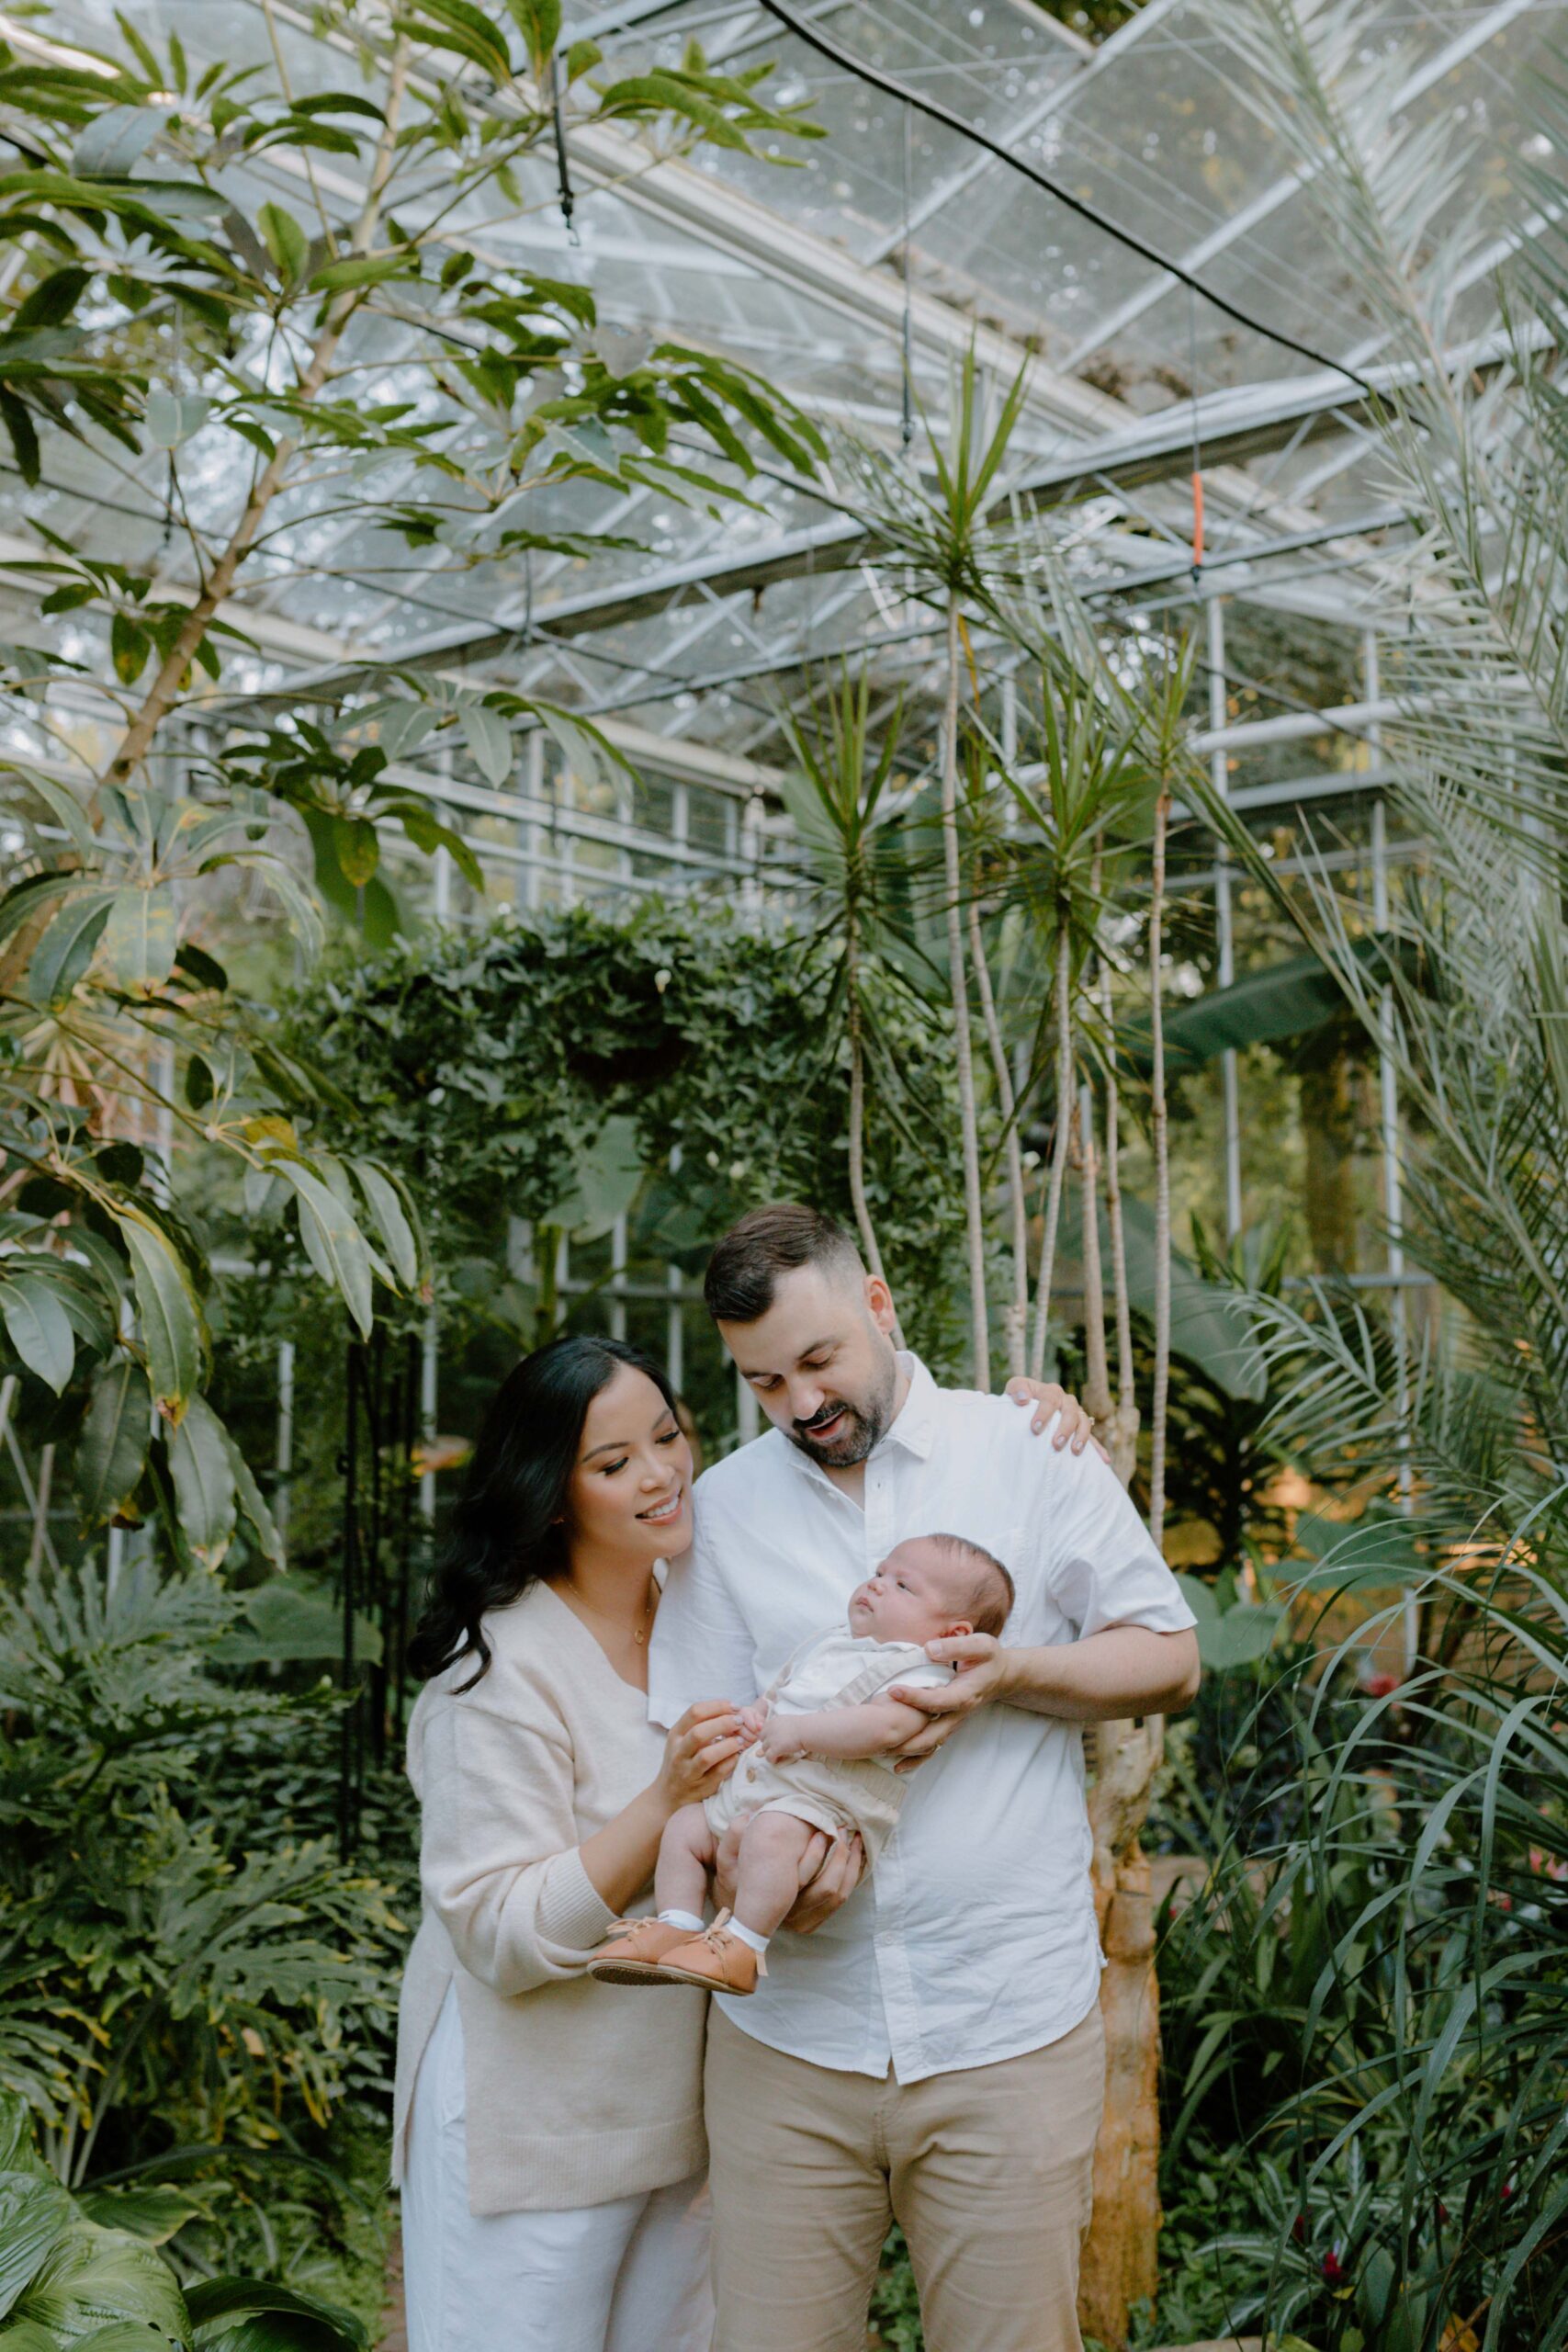 Mom and dad hold newborn baby in a garden